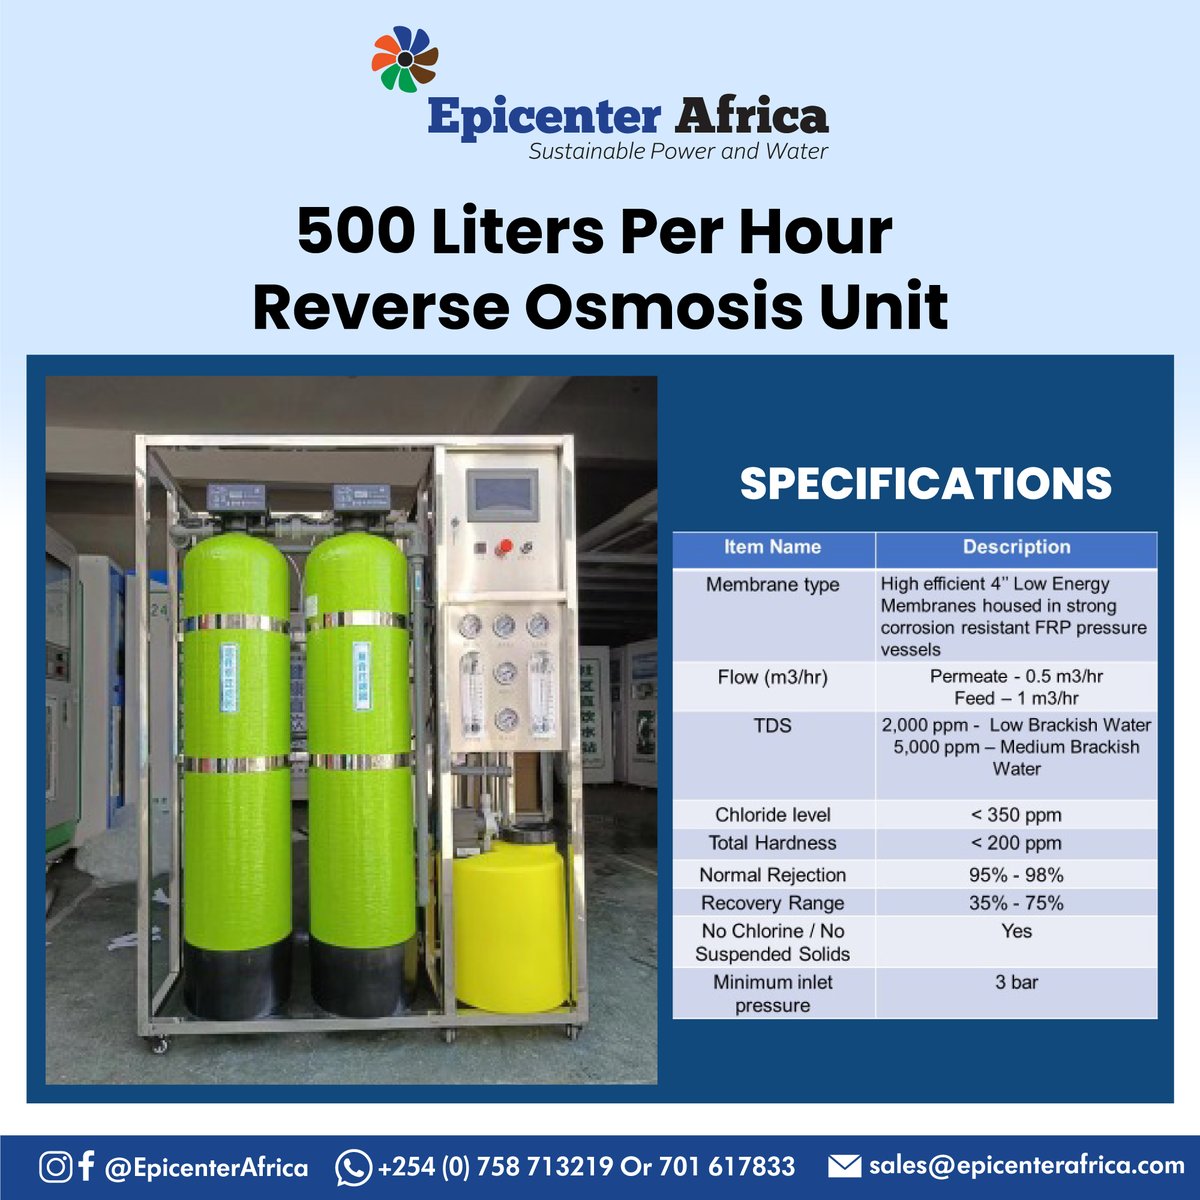 The 500L/H water treatment plant is designed to meet the diverse needs of various consumers we ensure access to safe, purified water, empowering communities and businesses to thrive.
Invest in reliability, invest in quality.
#Transformingcommunities #Changinglives #Watertreatment